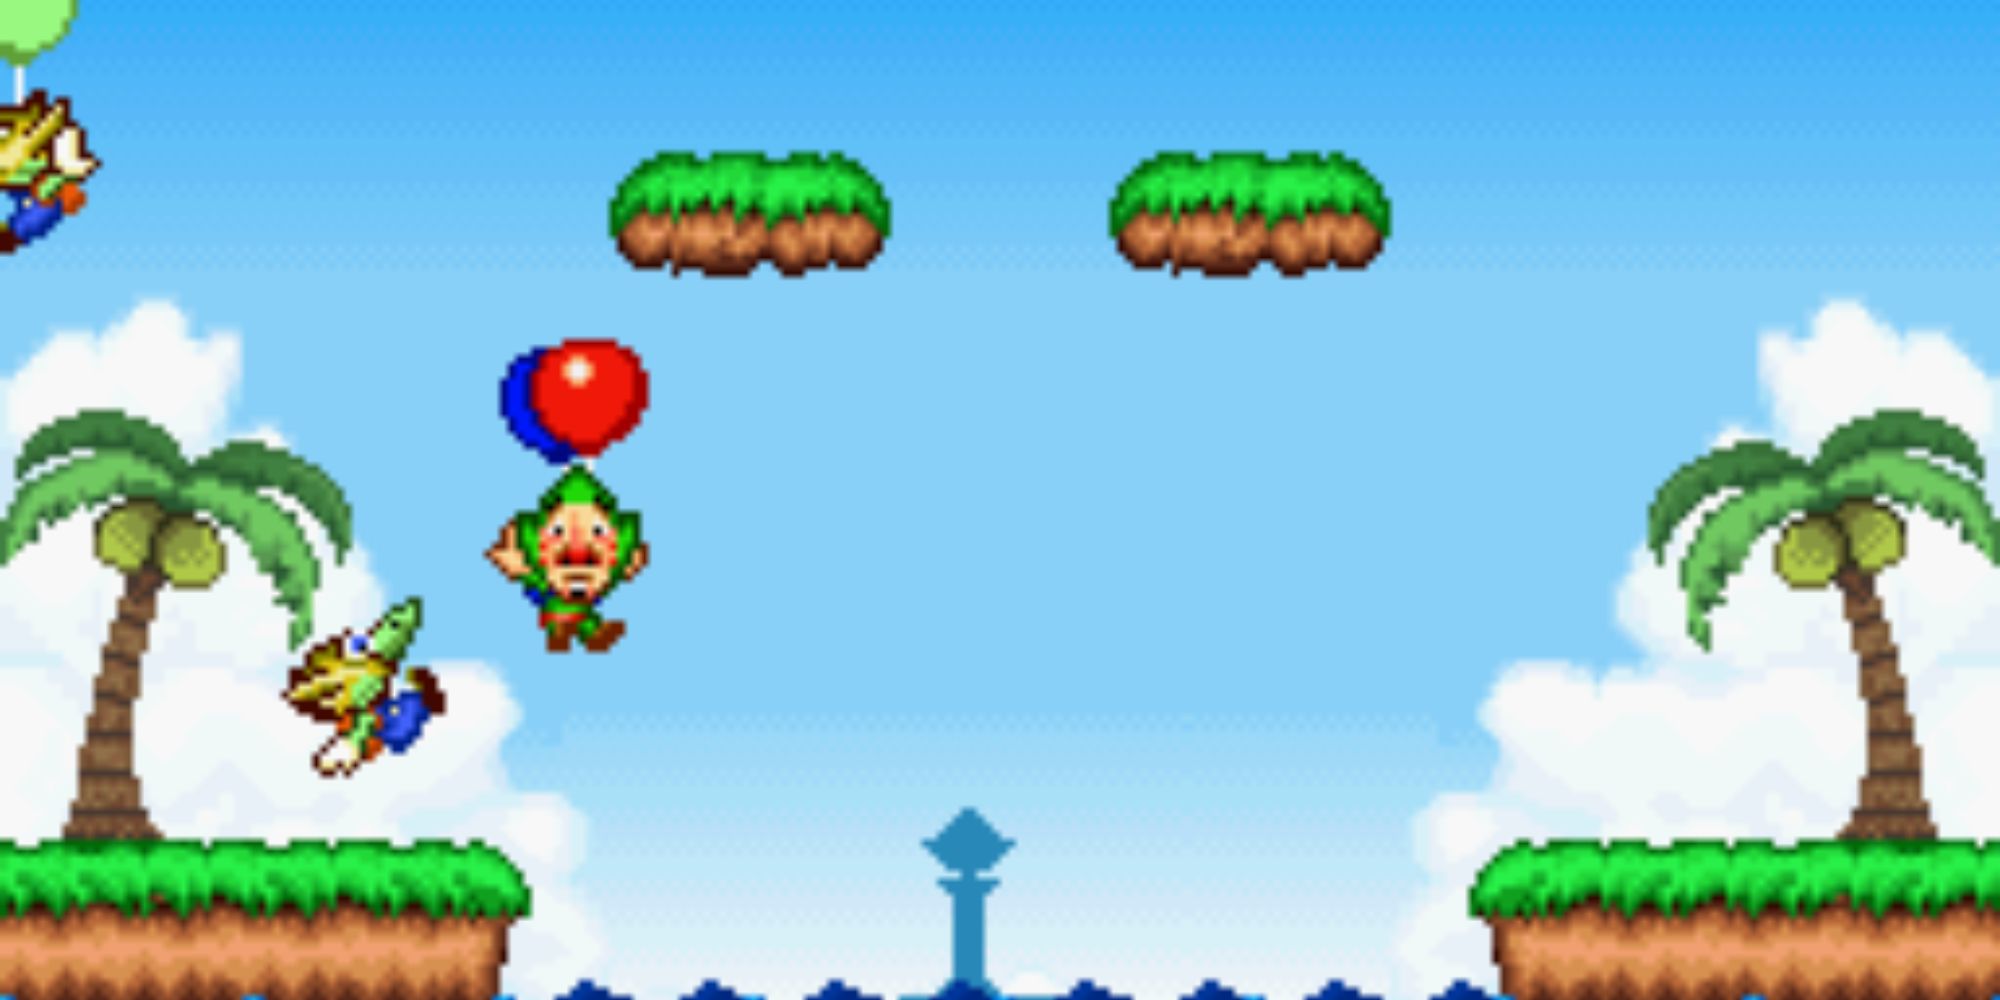 Tingle facing the screen in a balloon fight